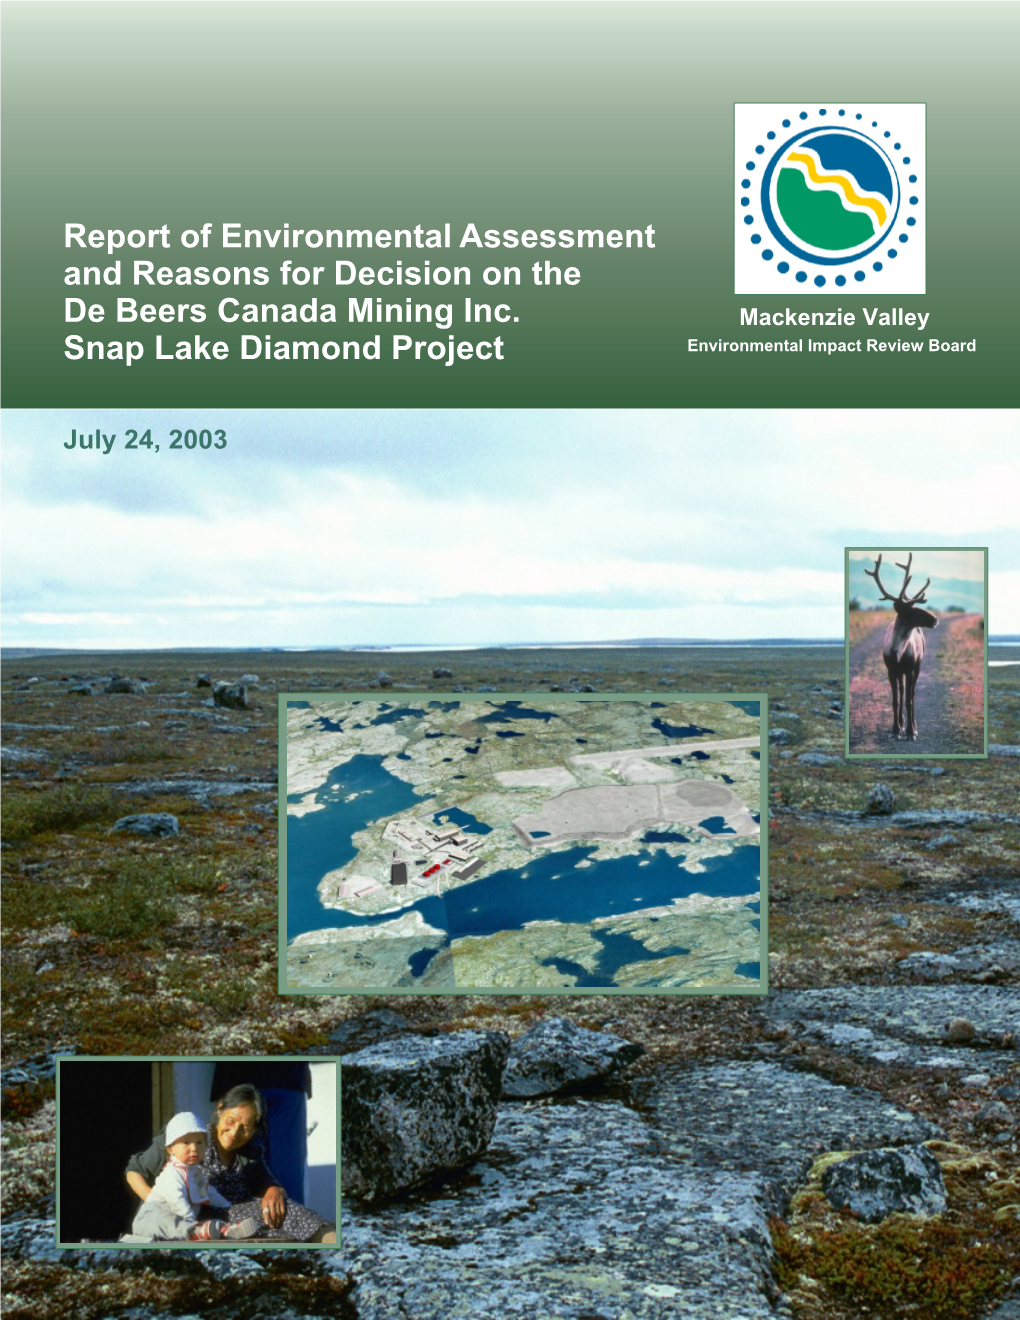 Report of Environmental Assessment and Reasons for Decision on the De Beers Canada Mining Inc